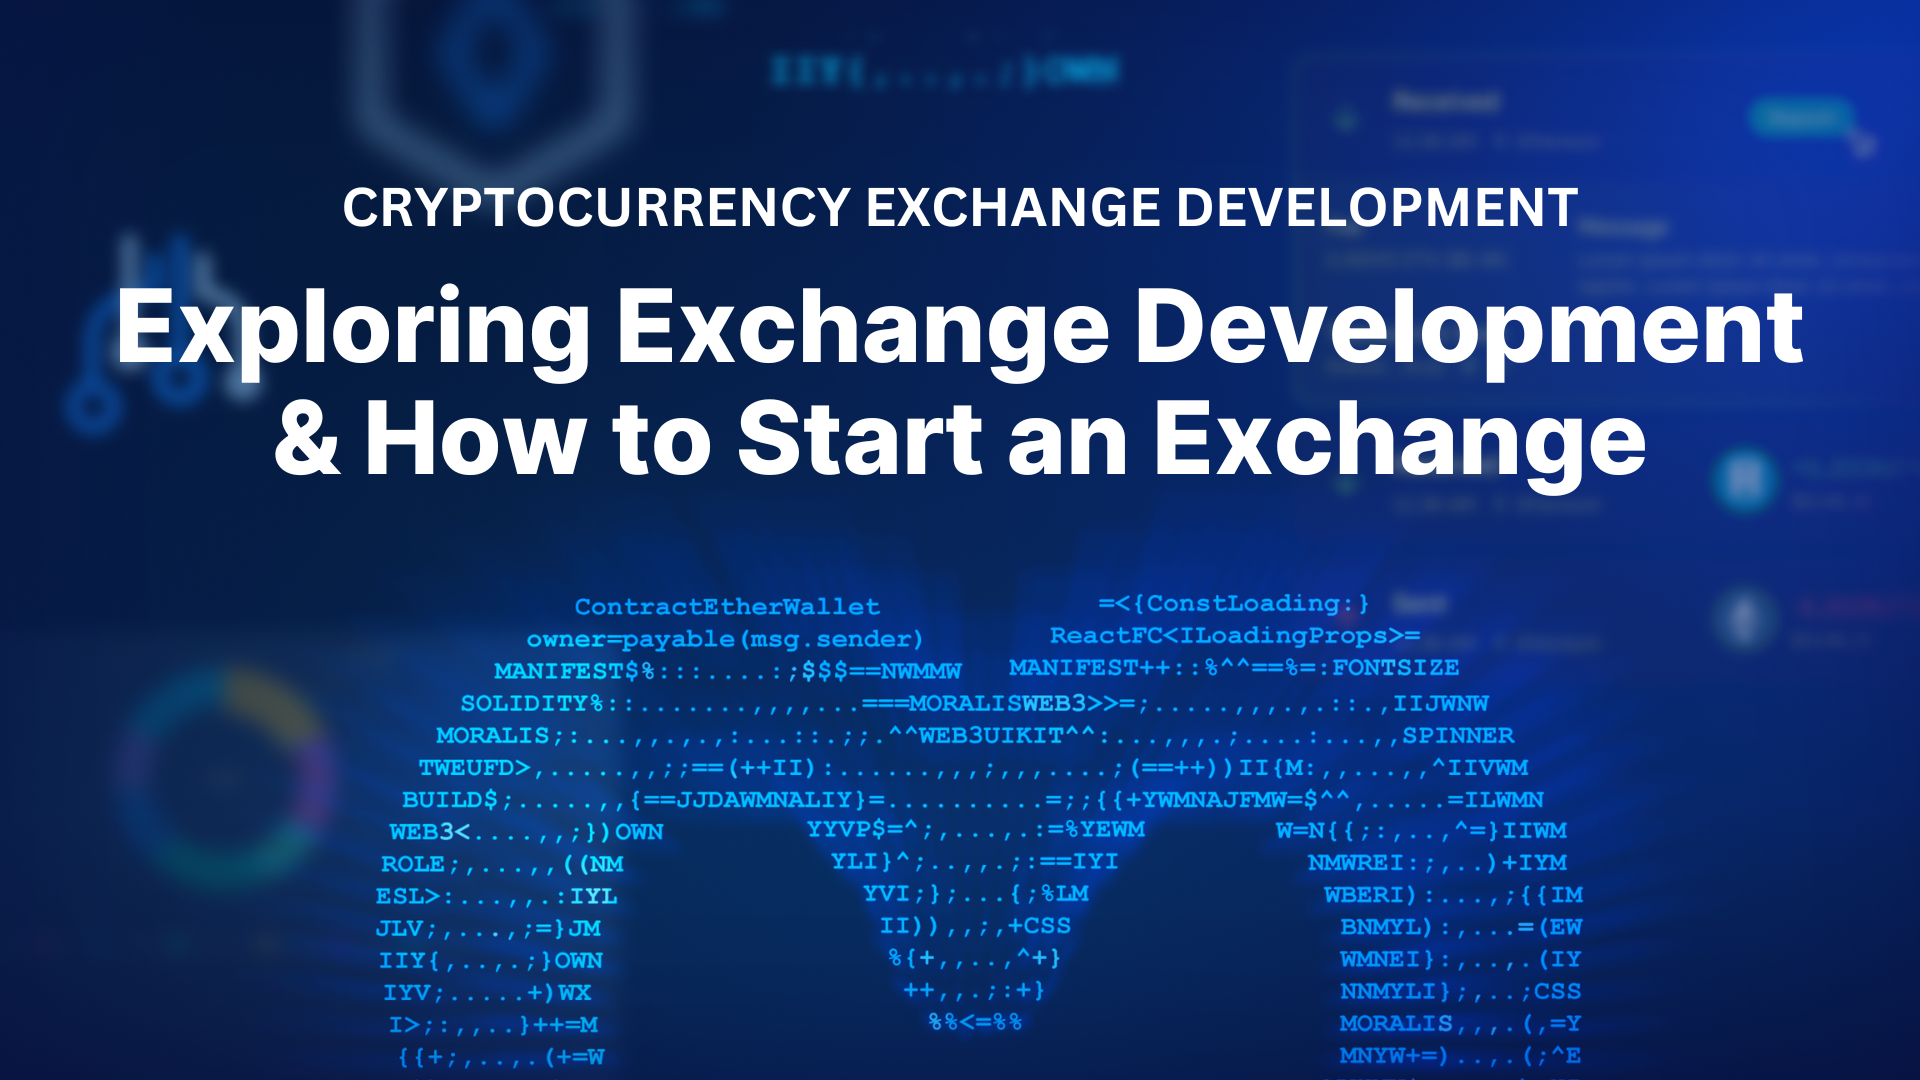 How to Start Your Own Bitcoin Exchange Business - 10 Steps